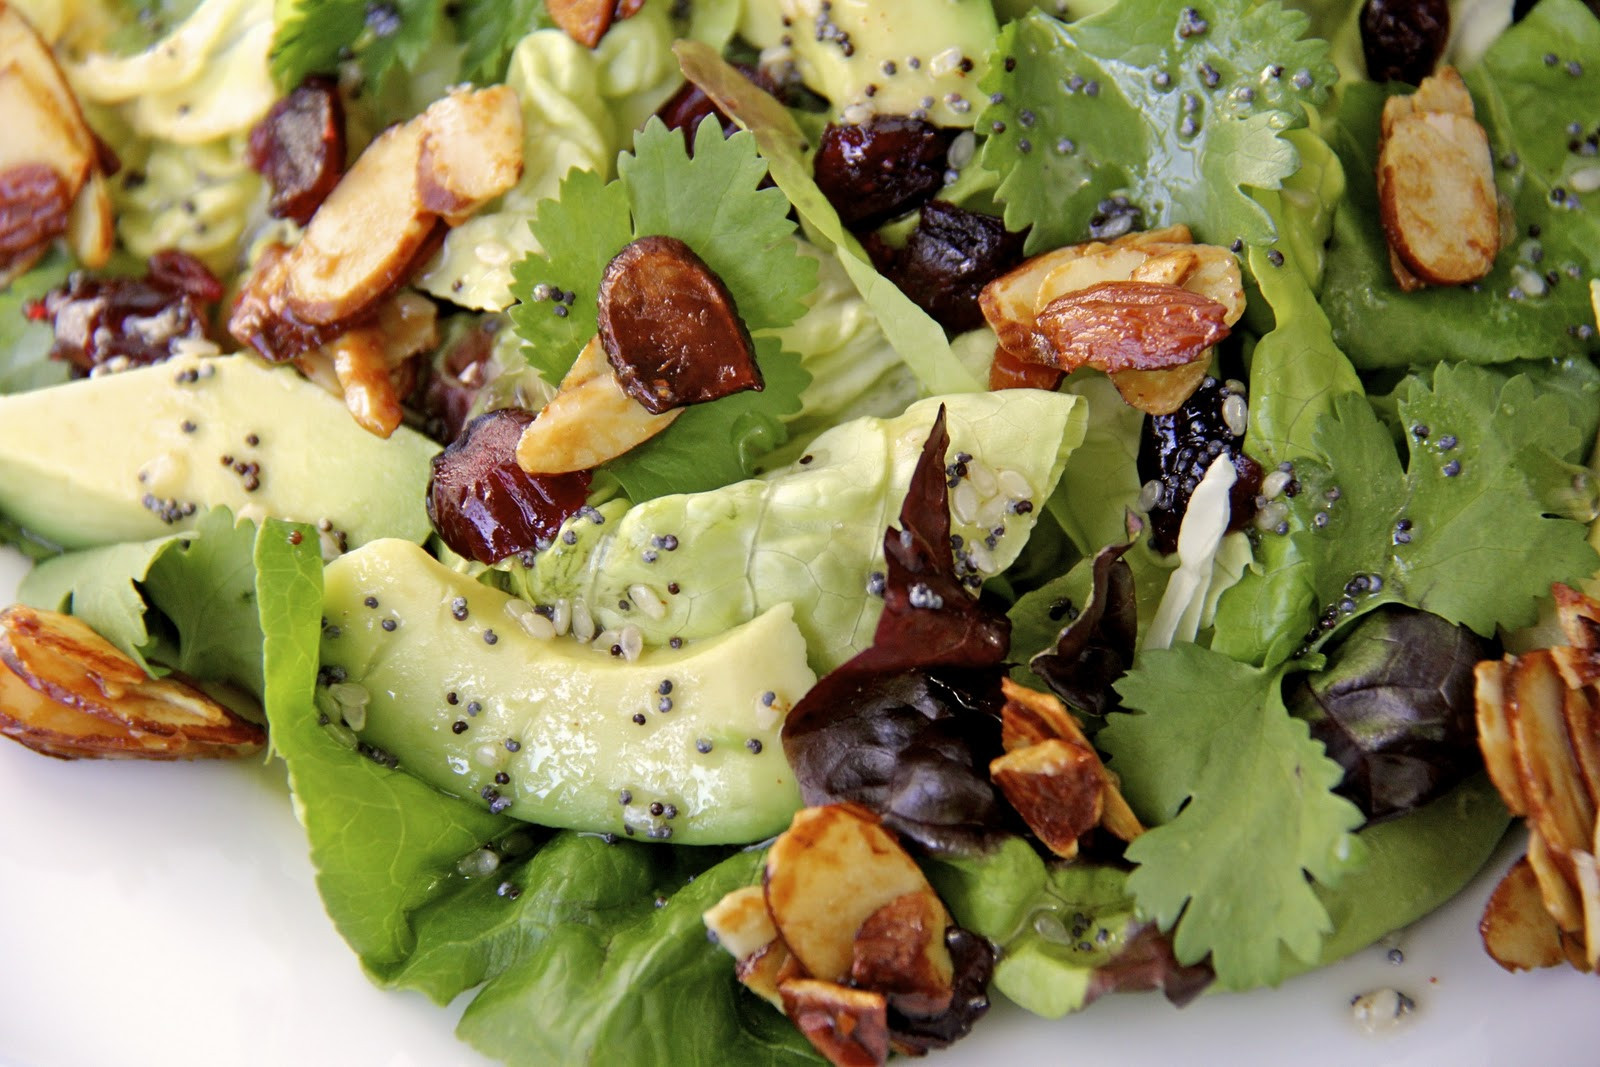 Healthy Salads For Lunch
 Healthy Lunch Salad Recipes to Take To Work